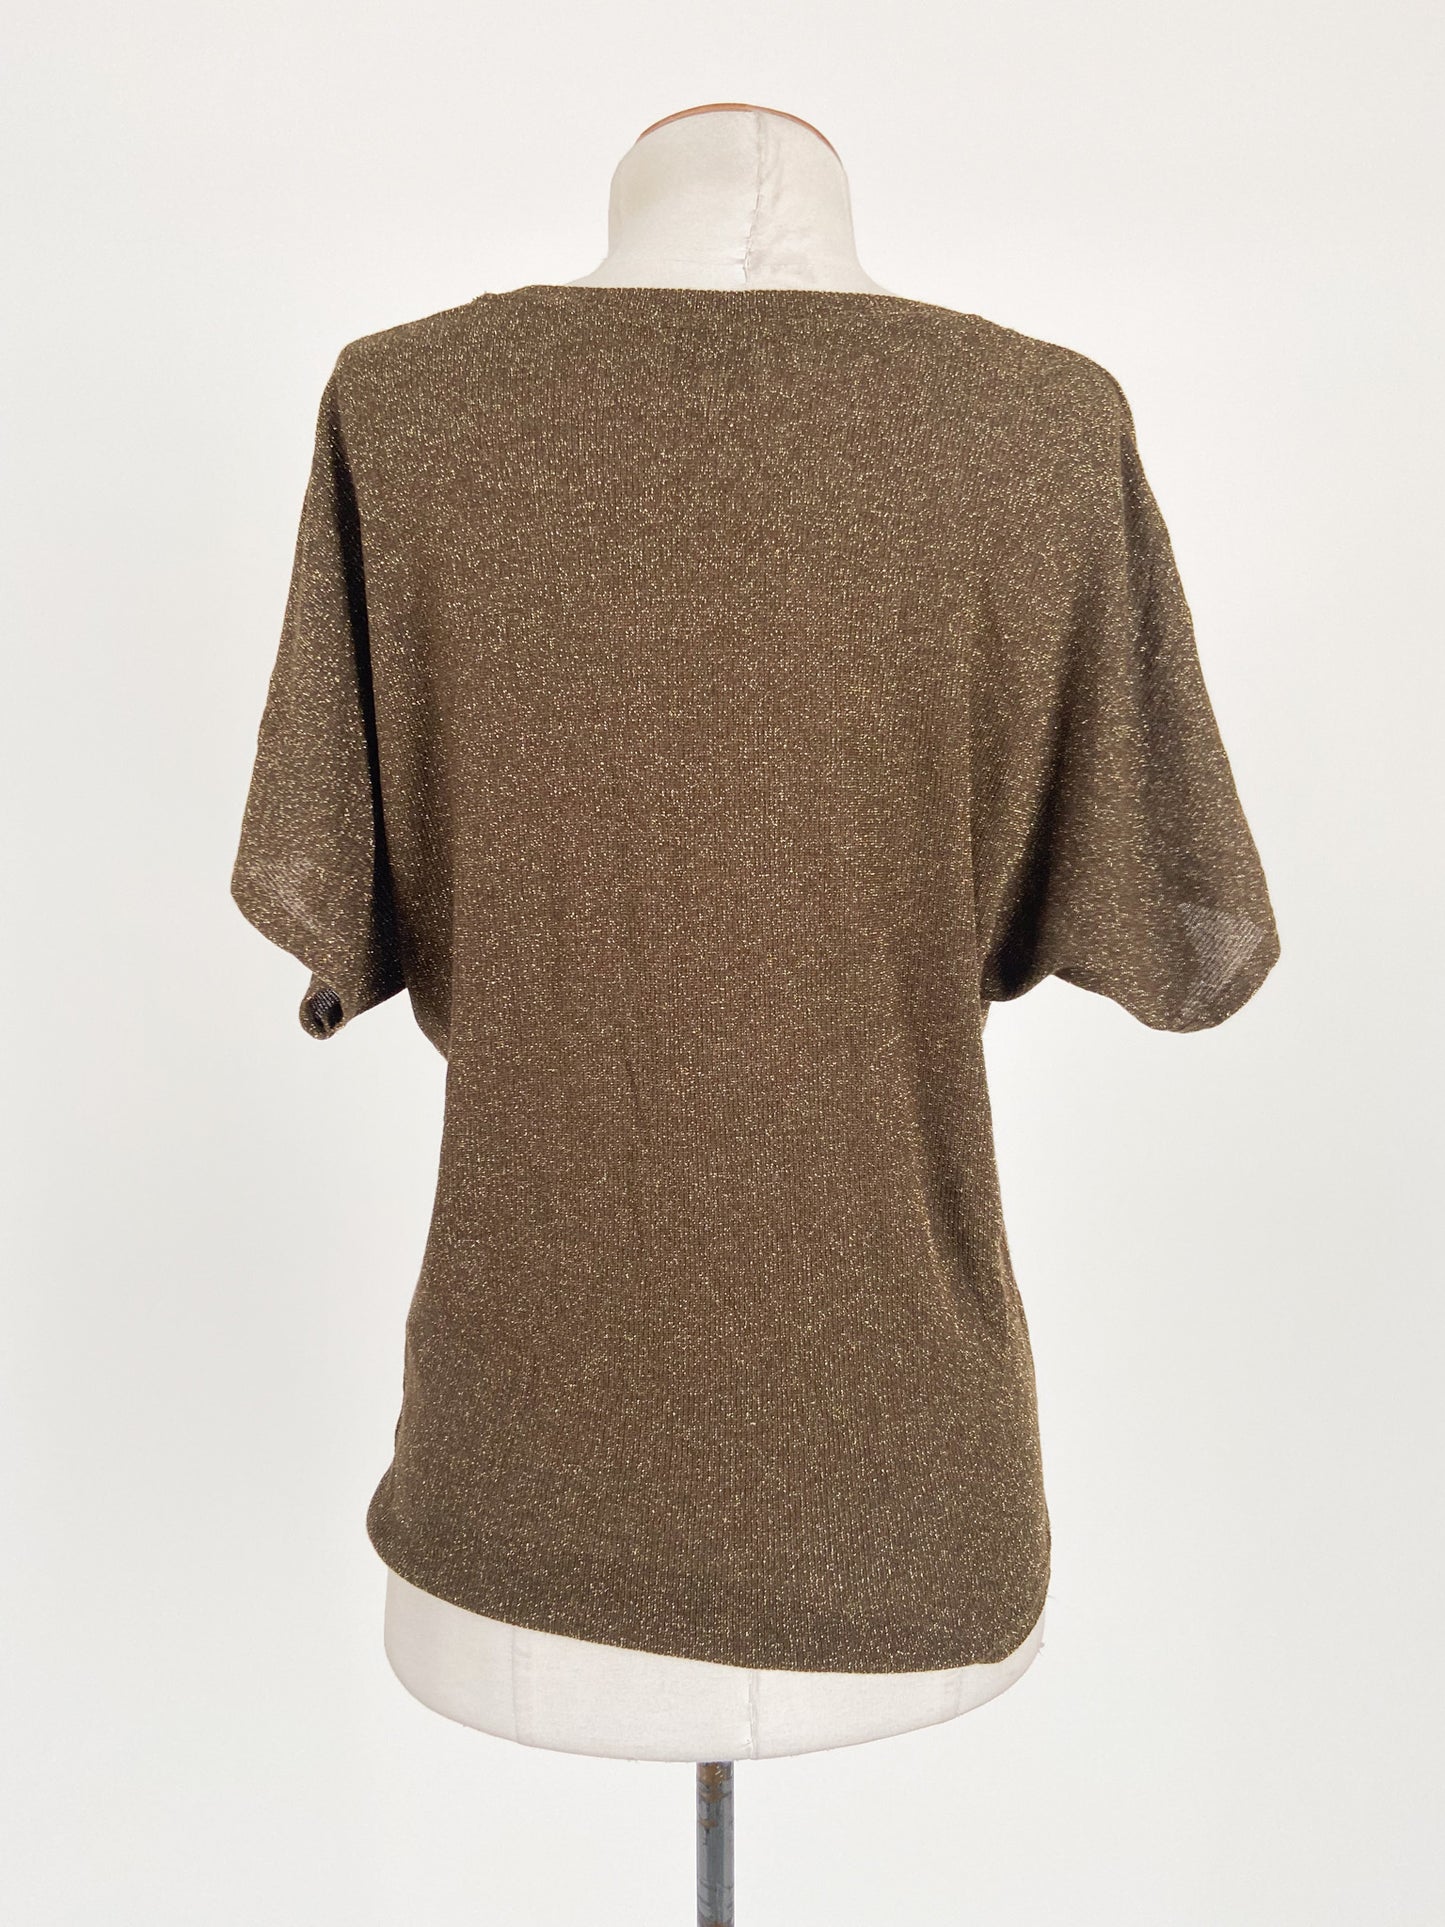 Witchery | Gold Casual/Workwear Top | Size S